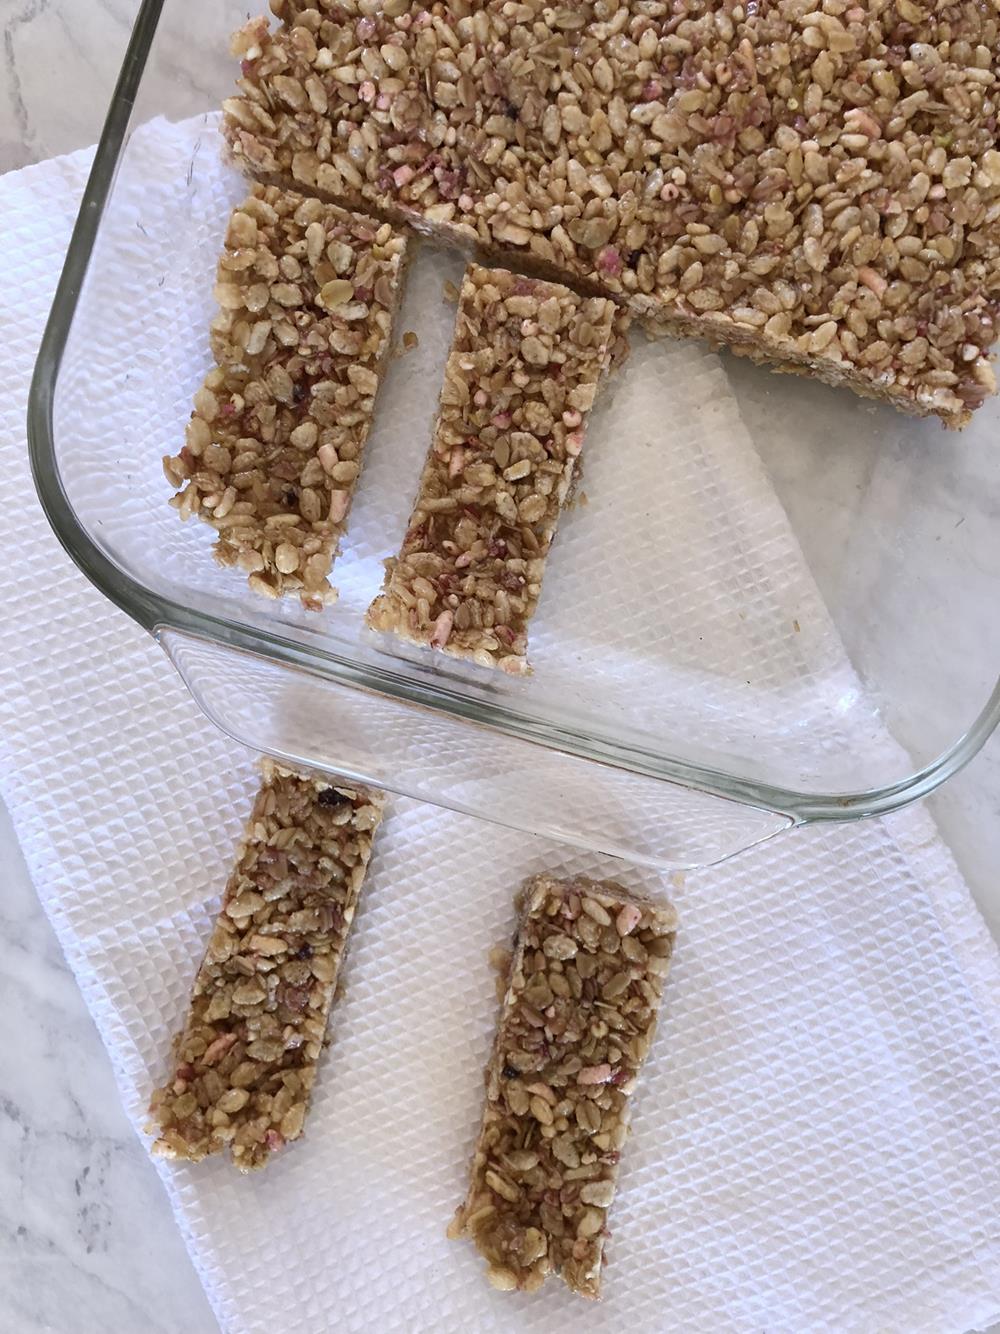 Homemade Granola Bars in glass pan on white cloth